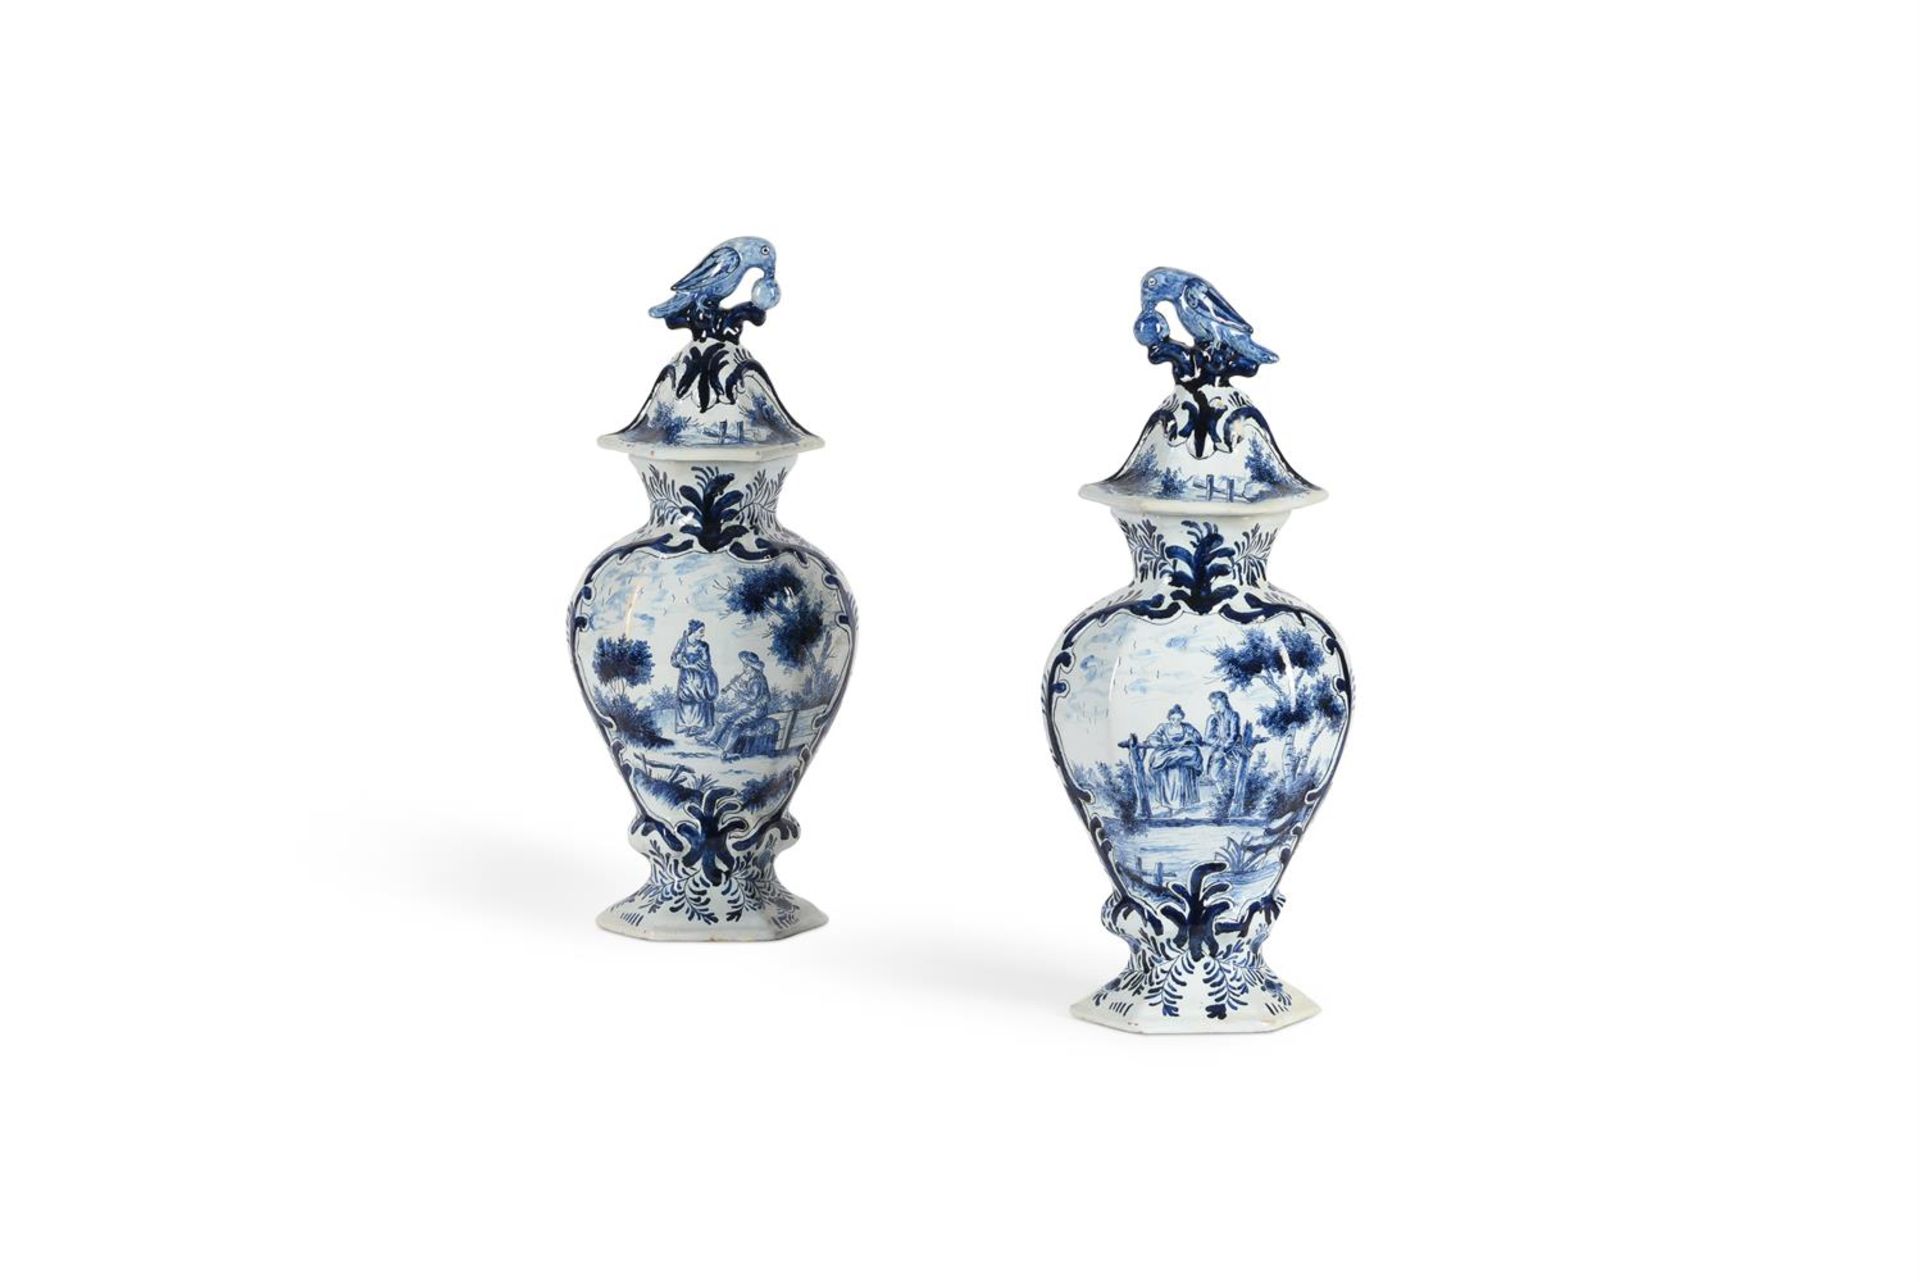 A PAIR OF DUTCH DELFT BALUSTER VASES AND COVERS, CIRCA 1900